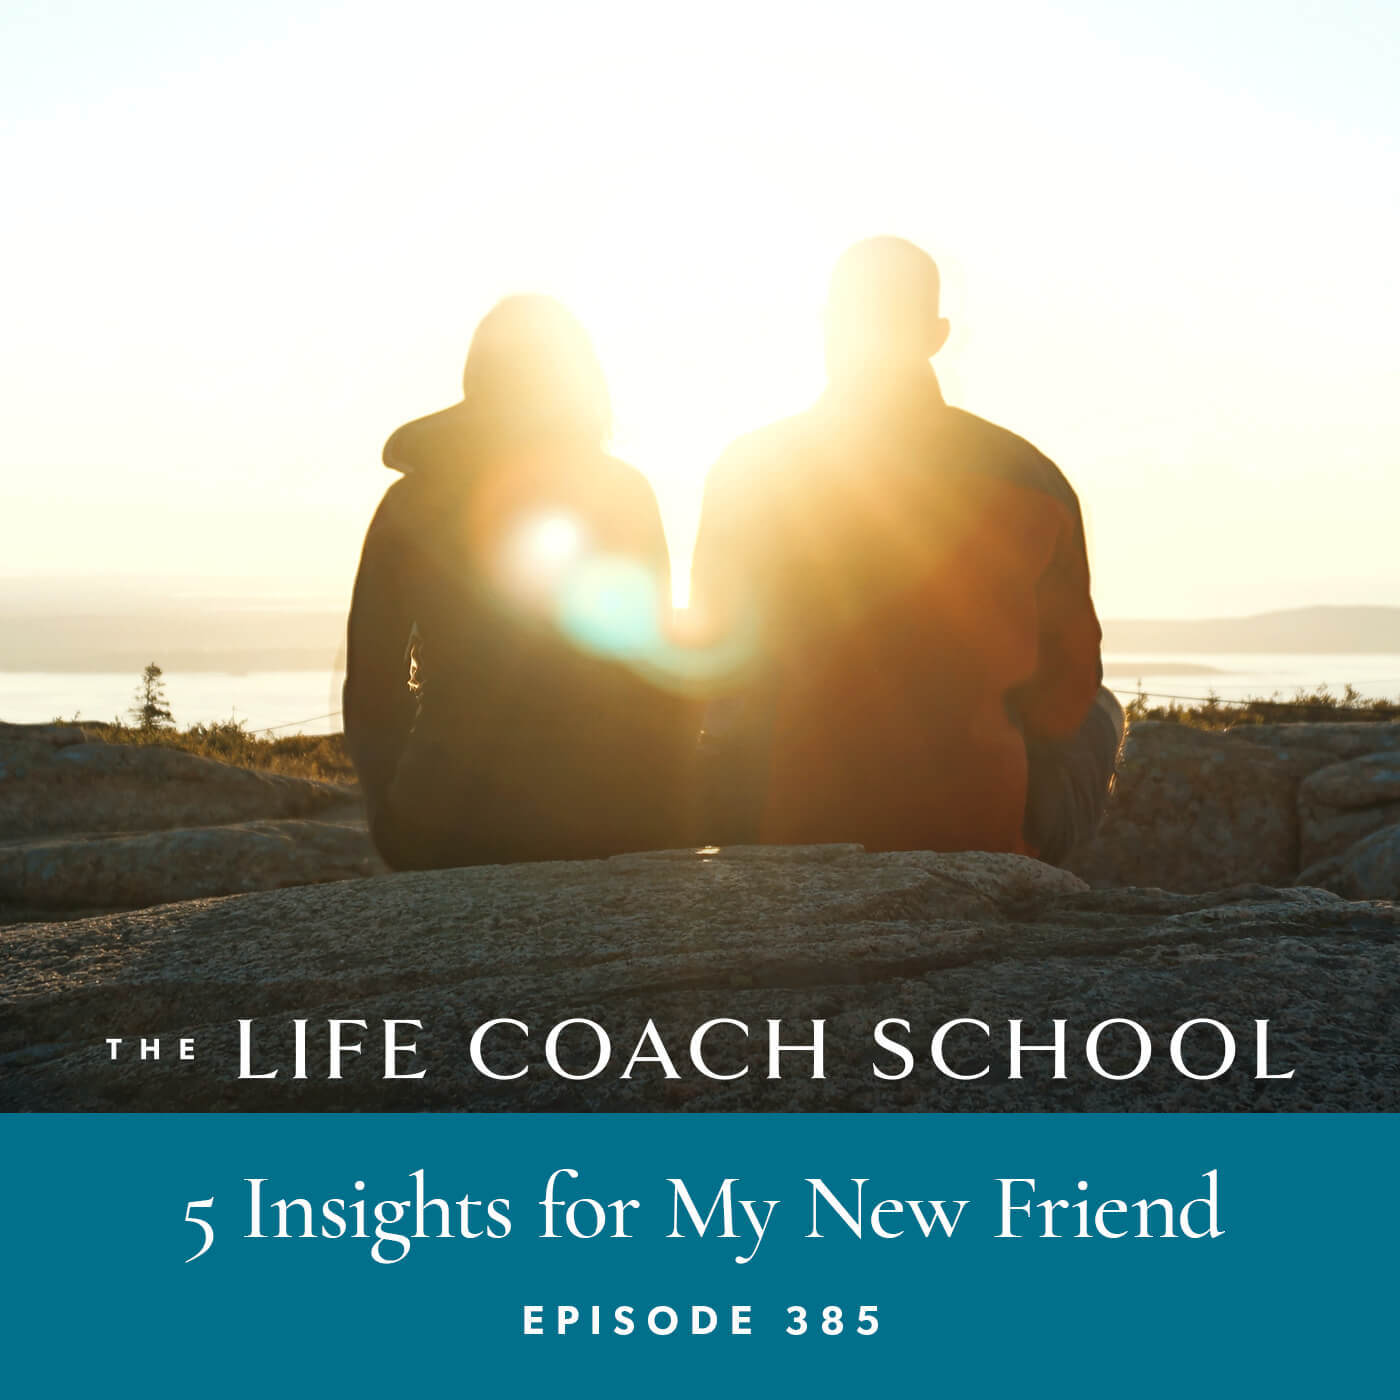 The Life Coach School Podcast with Brooke Castillo | 5 Insights for My New Friend